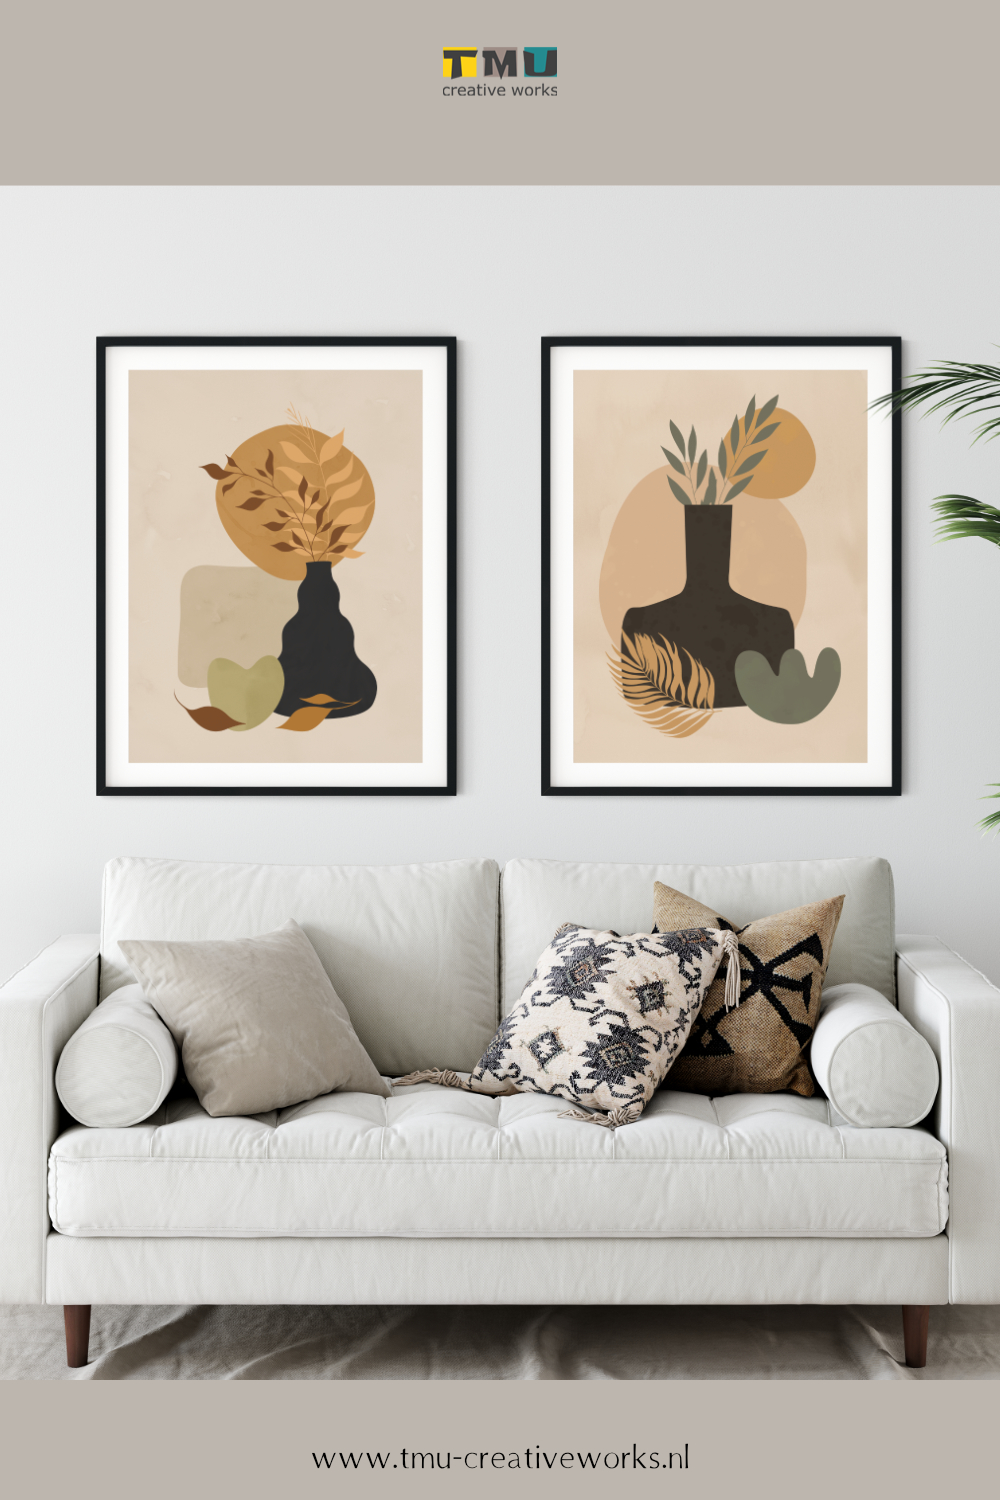 abstract and minimalist art in warm living room colors - mockup 1